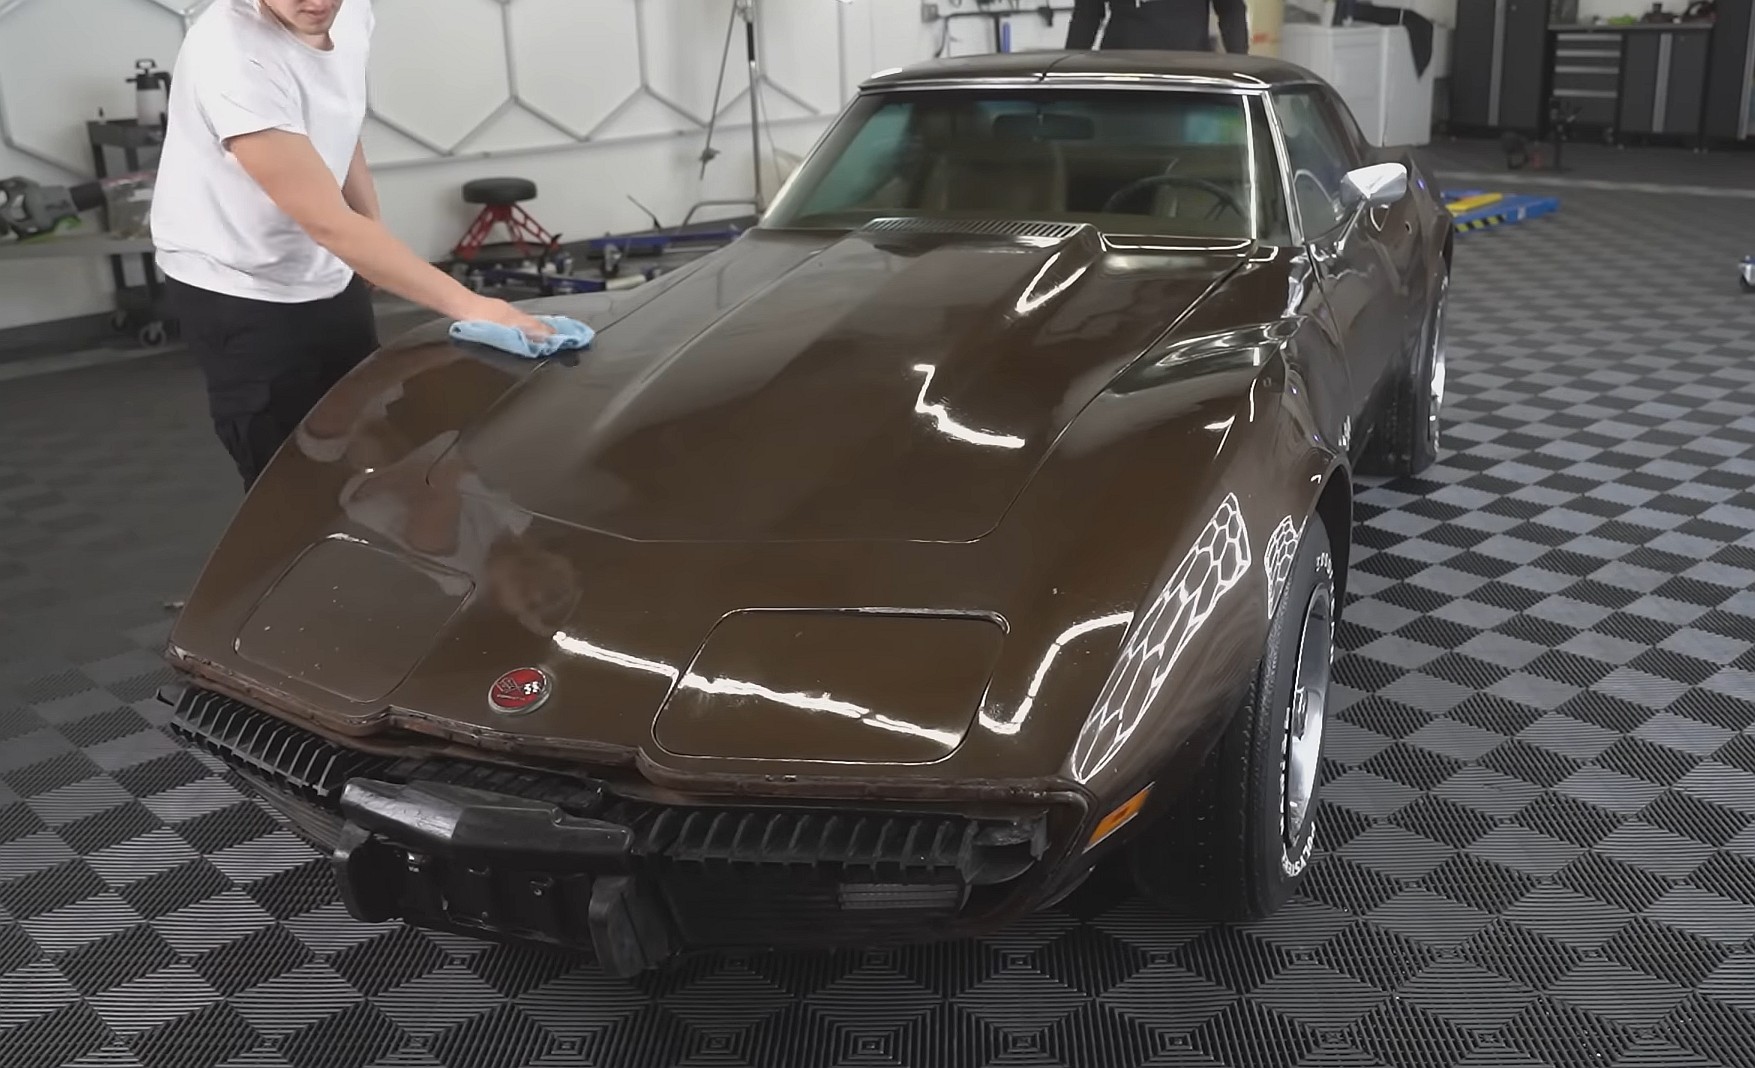 Forgotten 1974 Chevrolet Corvette Spent 34 Years in a Barn, Gets First Wash - autoevolution